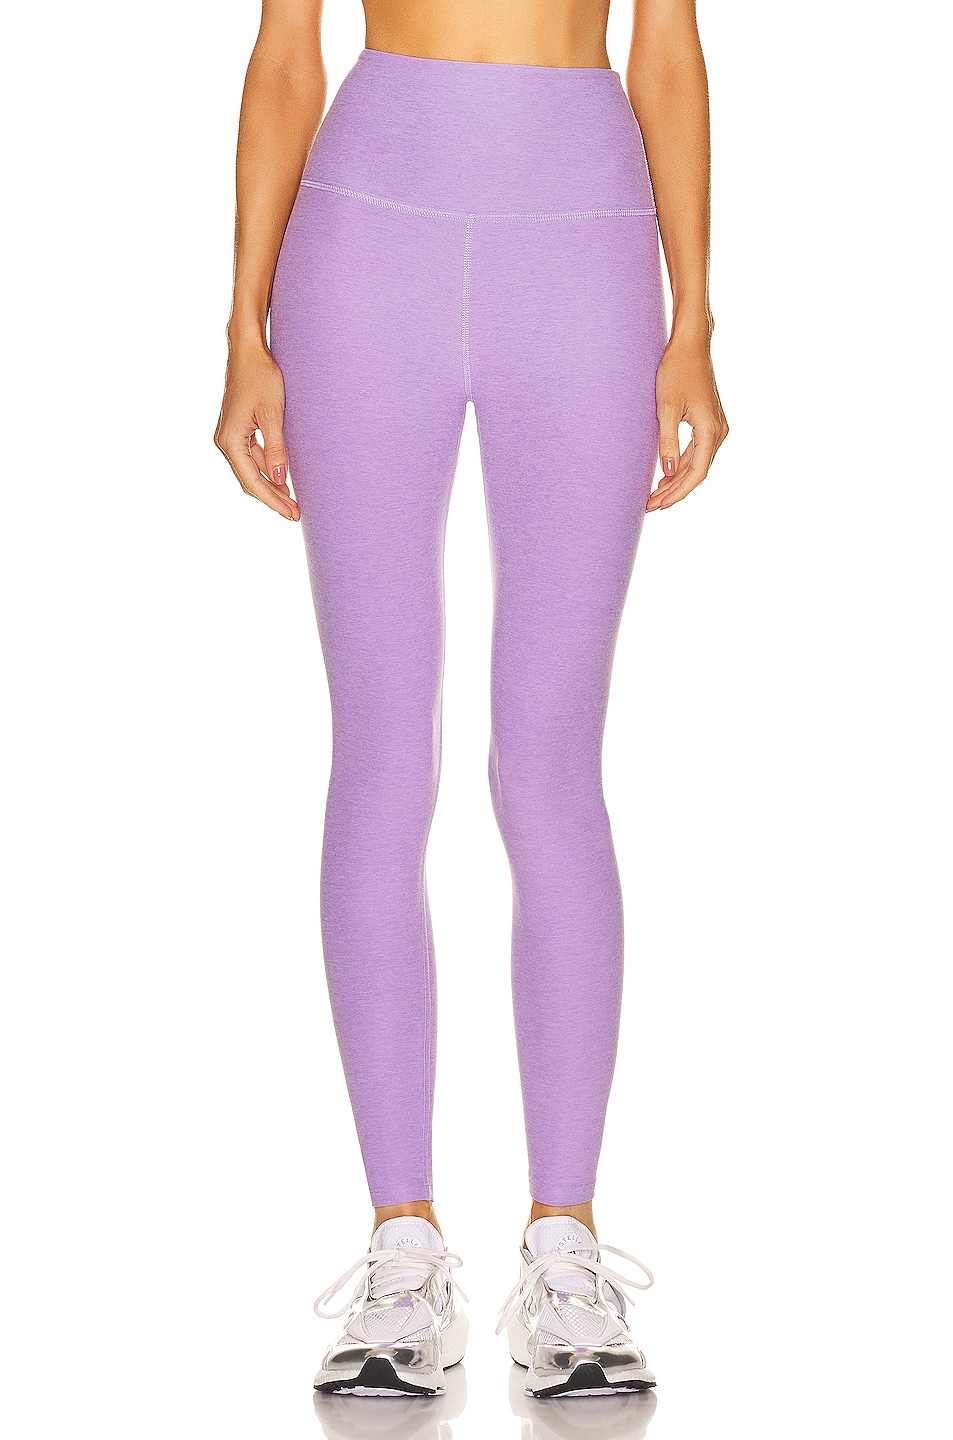 Image 1 of Beyond Yoga Spacedye Caught in the Midi High Waisted Legging in Crisp Lavender Heather